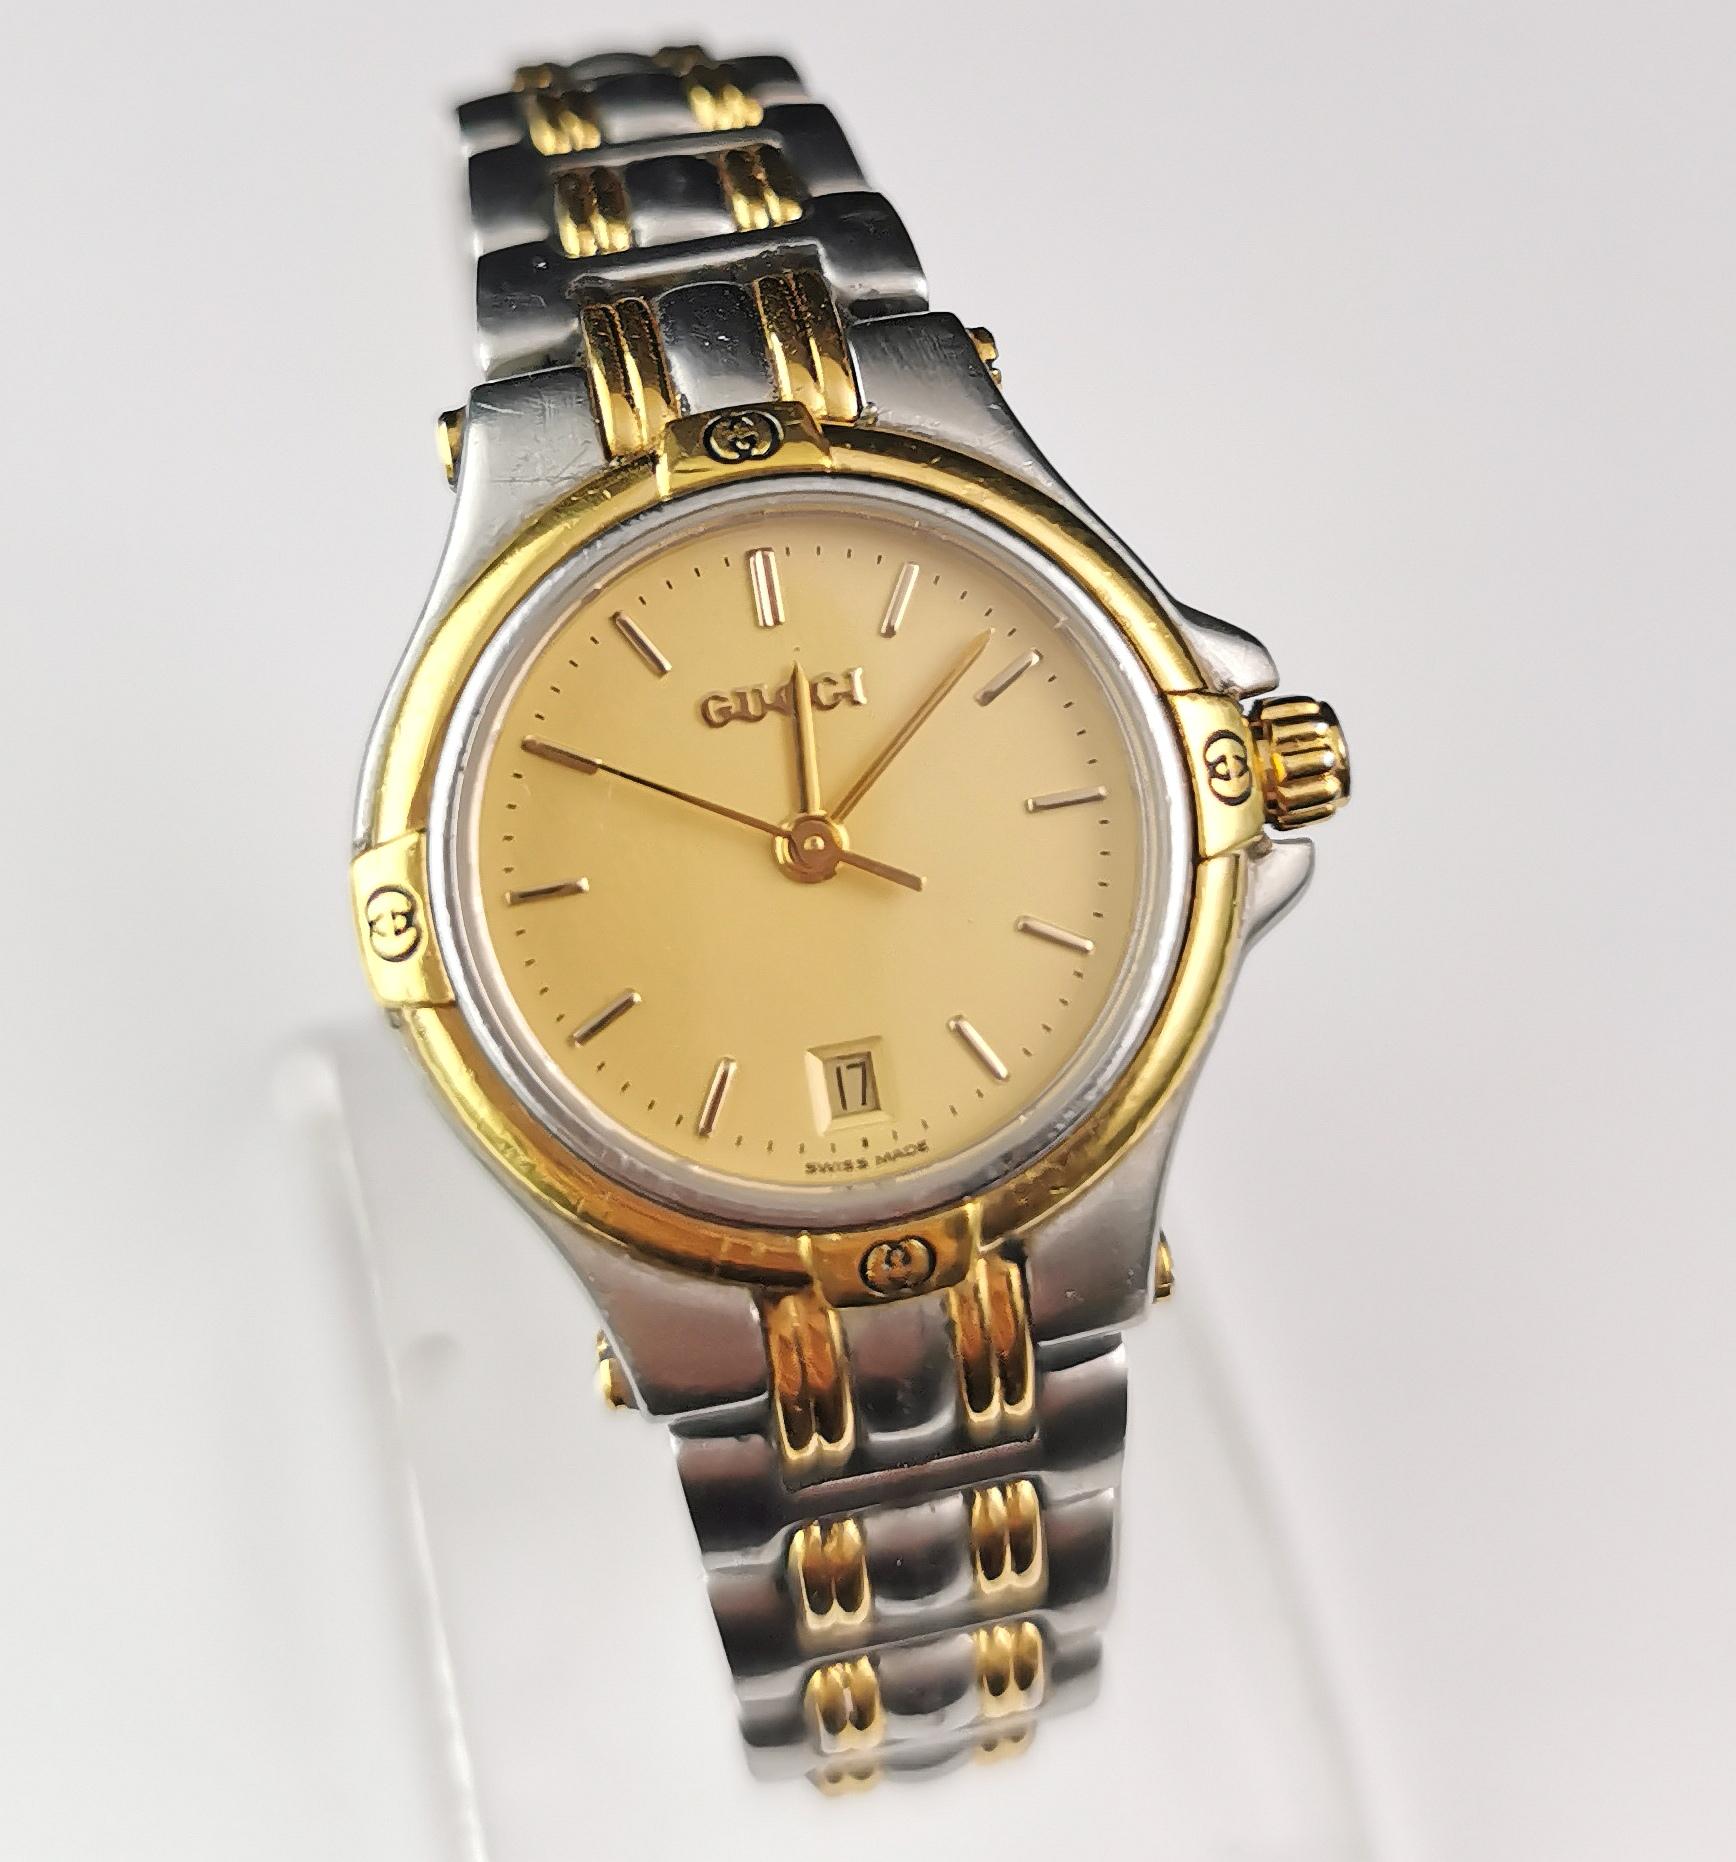 A stylish Gucci 9040l stainless steel and gold plated wristwatch. 

This is a bracelet strap watch with a chunky design, it has a brick link bracelet strap in stainless steel and 18ct gold plate. 

The case is stainless steel with gold plated